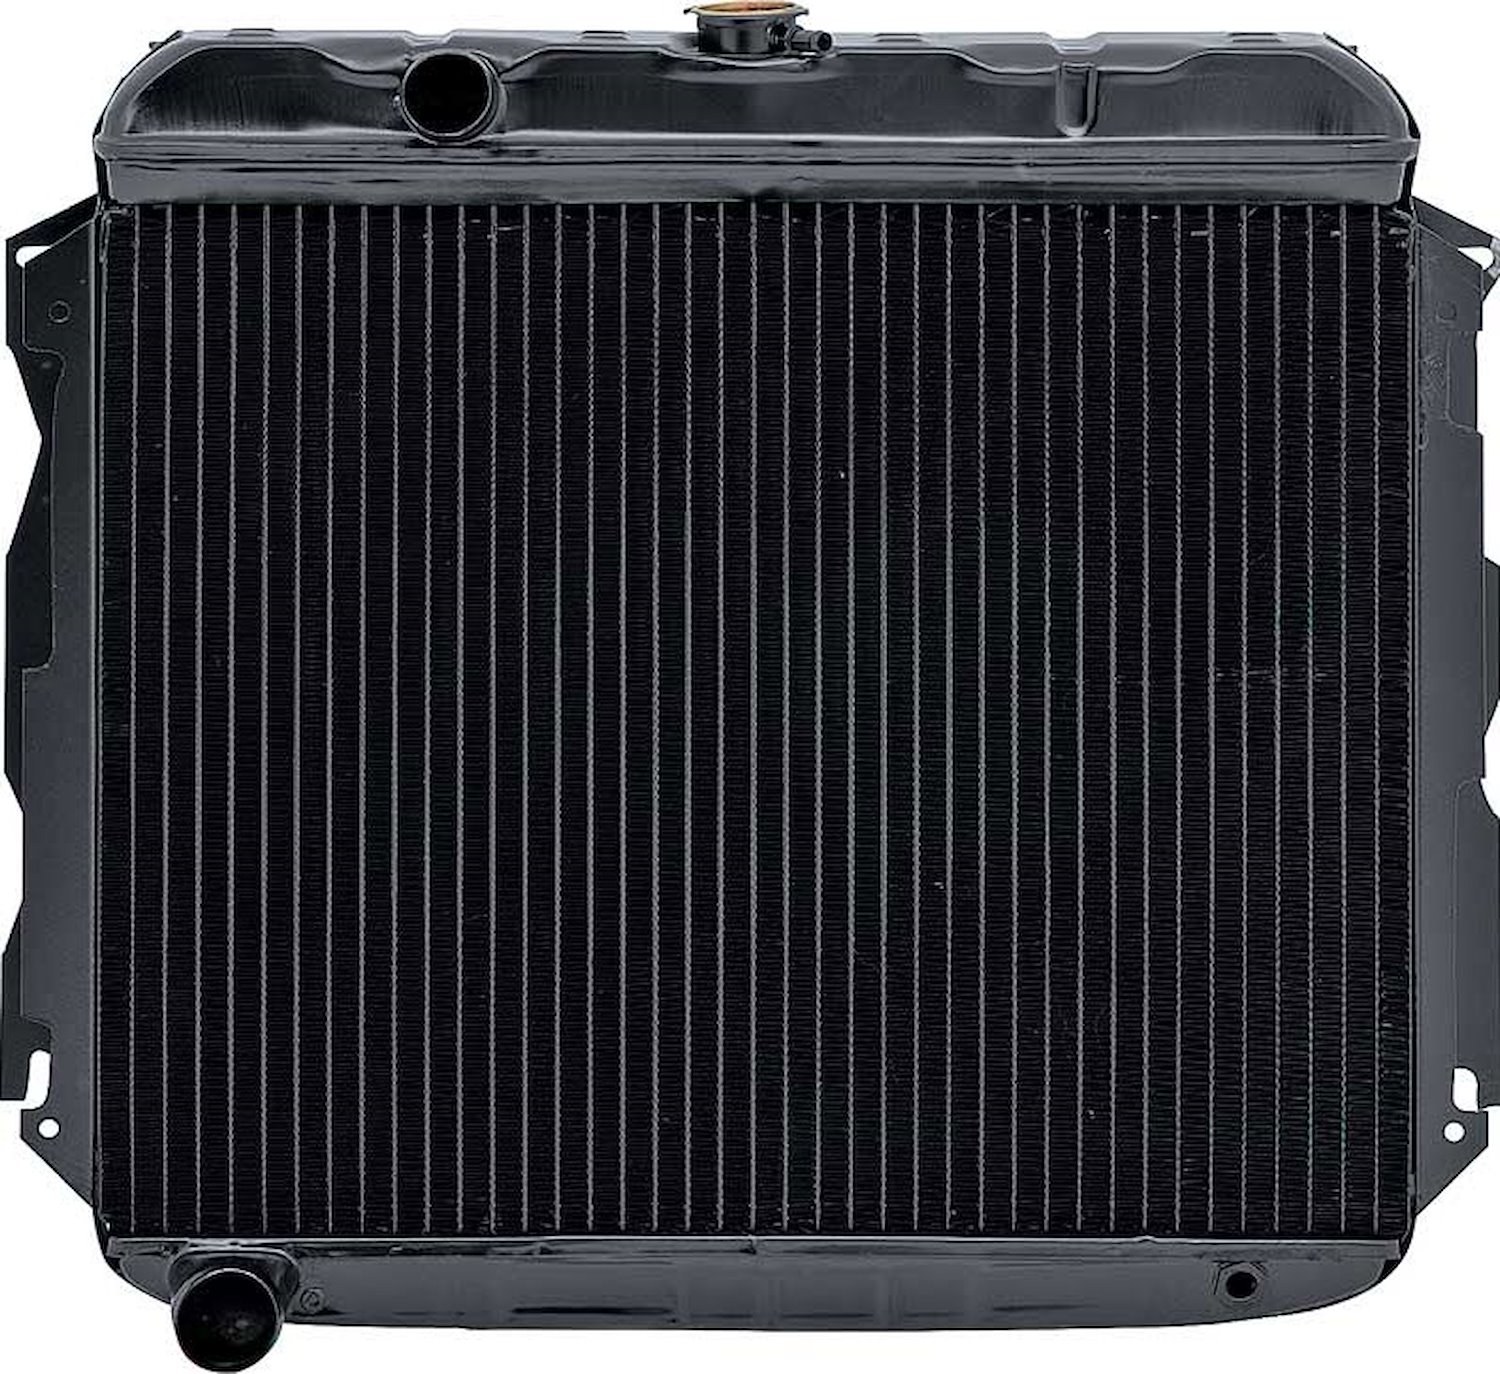 MB2382A Replacement Radiator 1966-69 Mopar B-Body Big Block V8 (Exc Hemi) With Auto Trans 4 Row 22" Wide